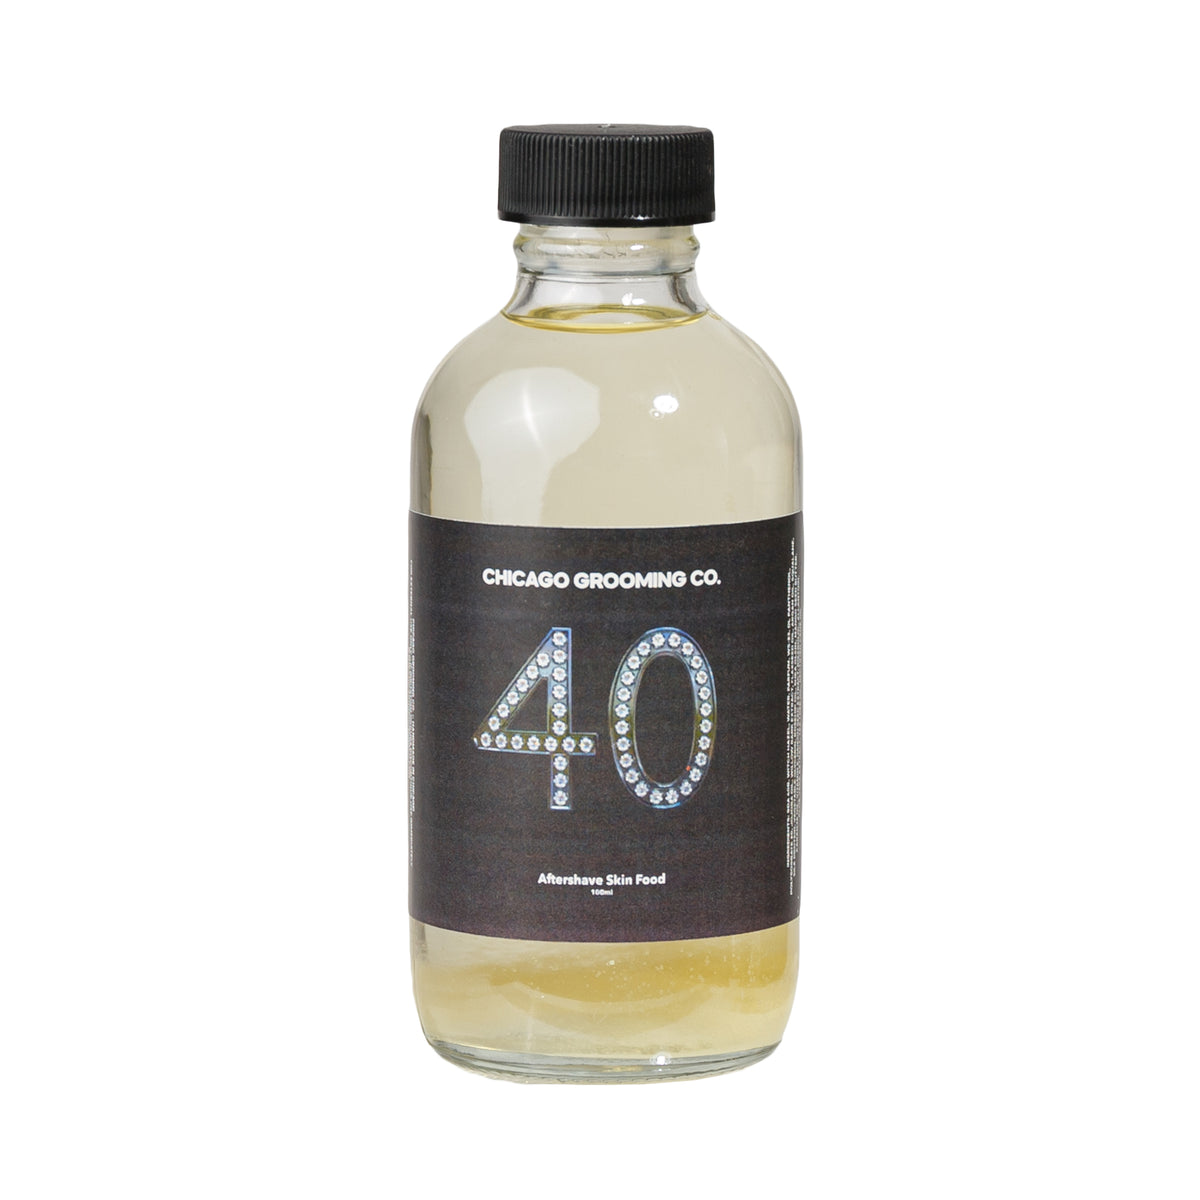 Primary Image of 40 Aftershave Skin Food